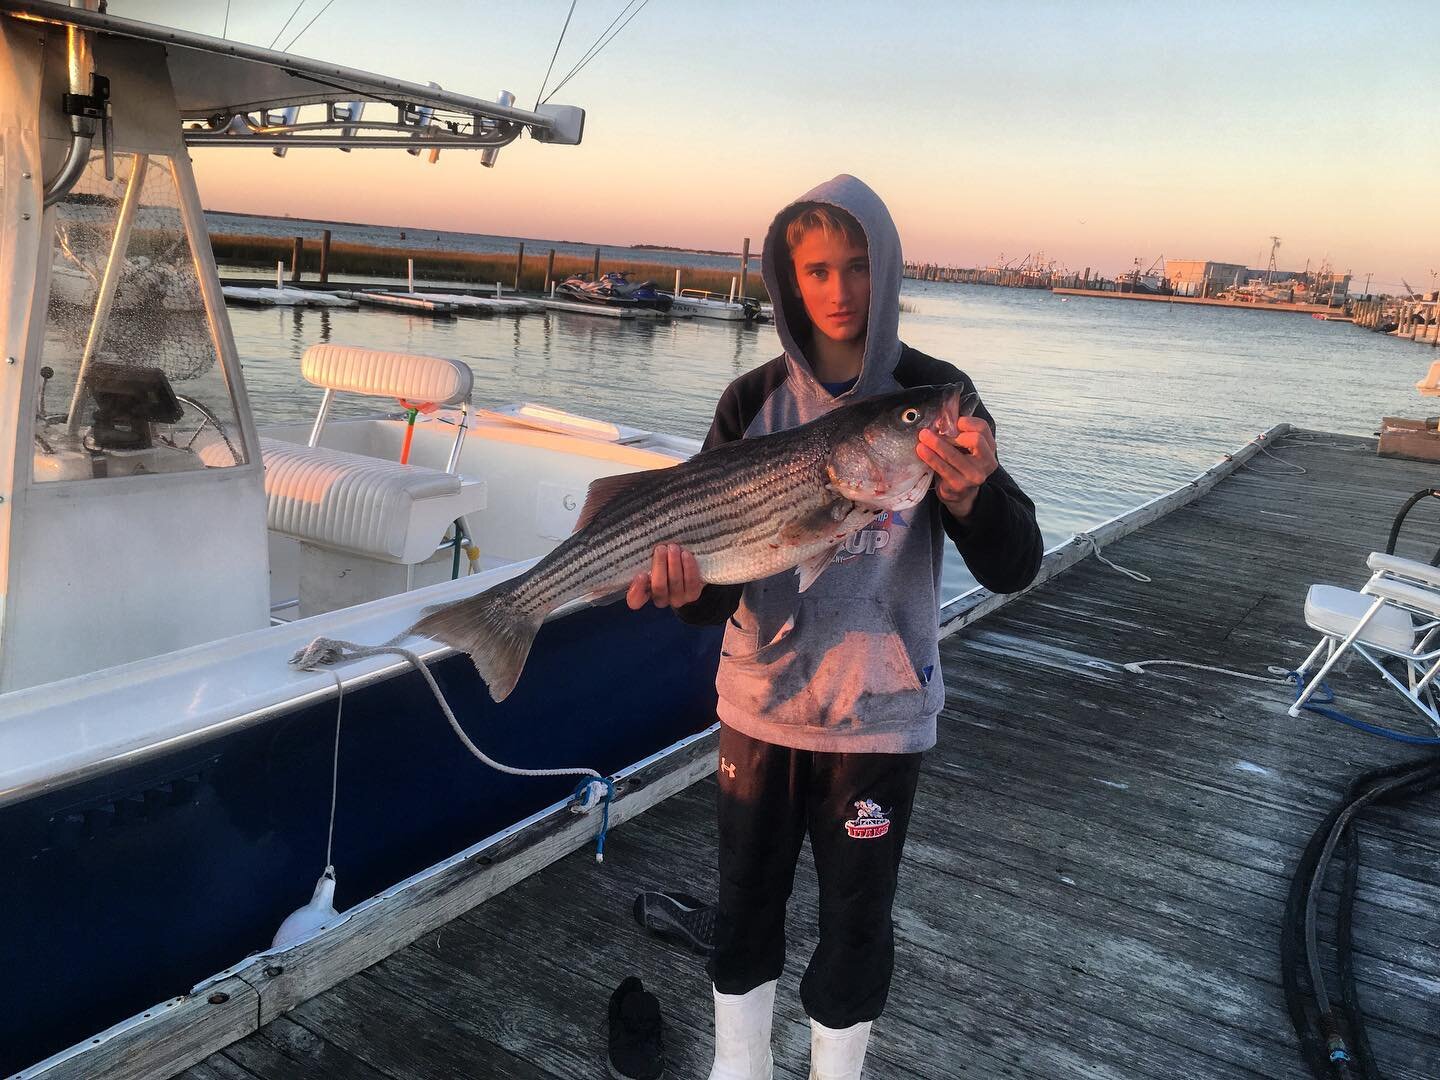 Here&rsquo;s @cole.kline with a perfect sized bass he caught in the inlet. #stripedbass